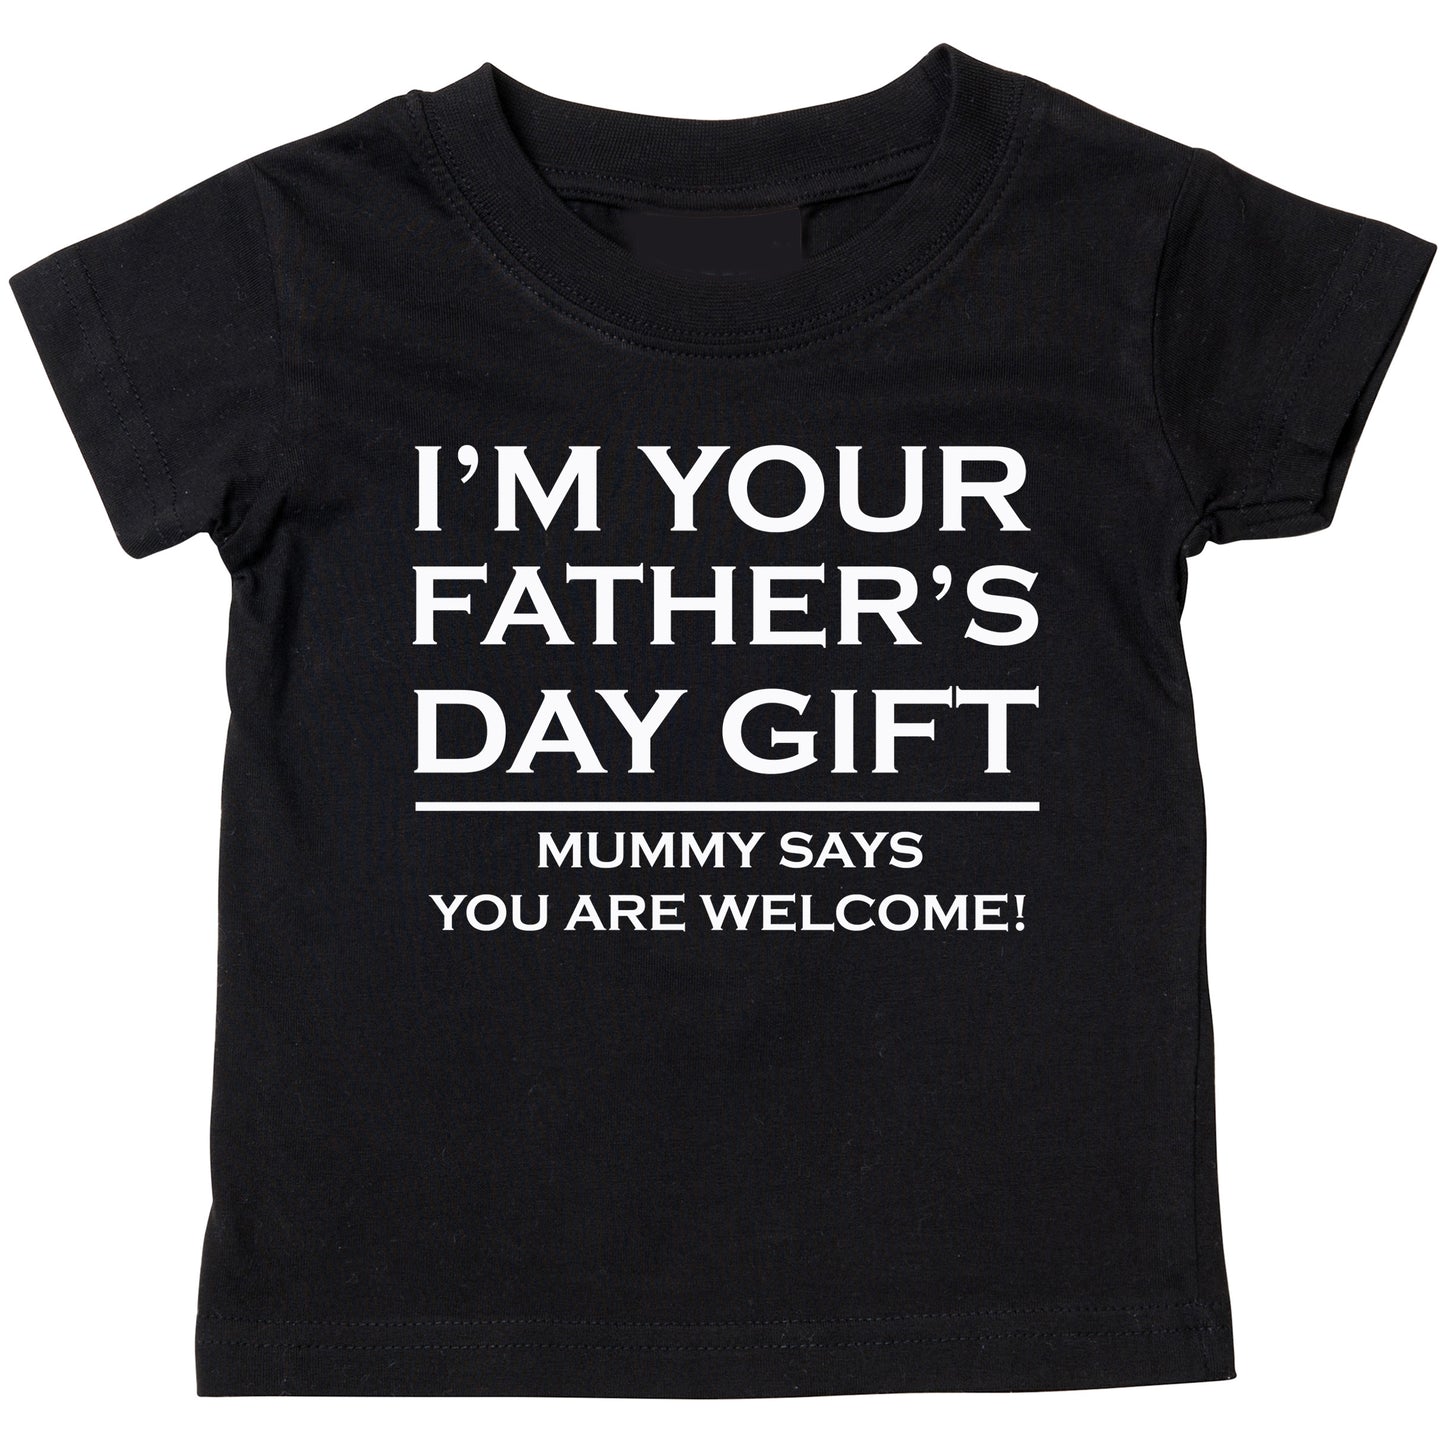 I'm your Father's Day Gift Tshirt (other options available)